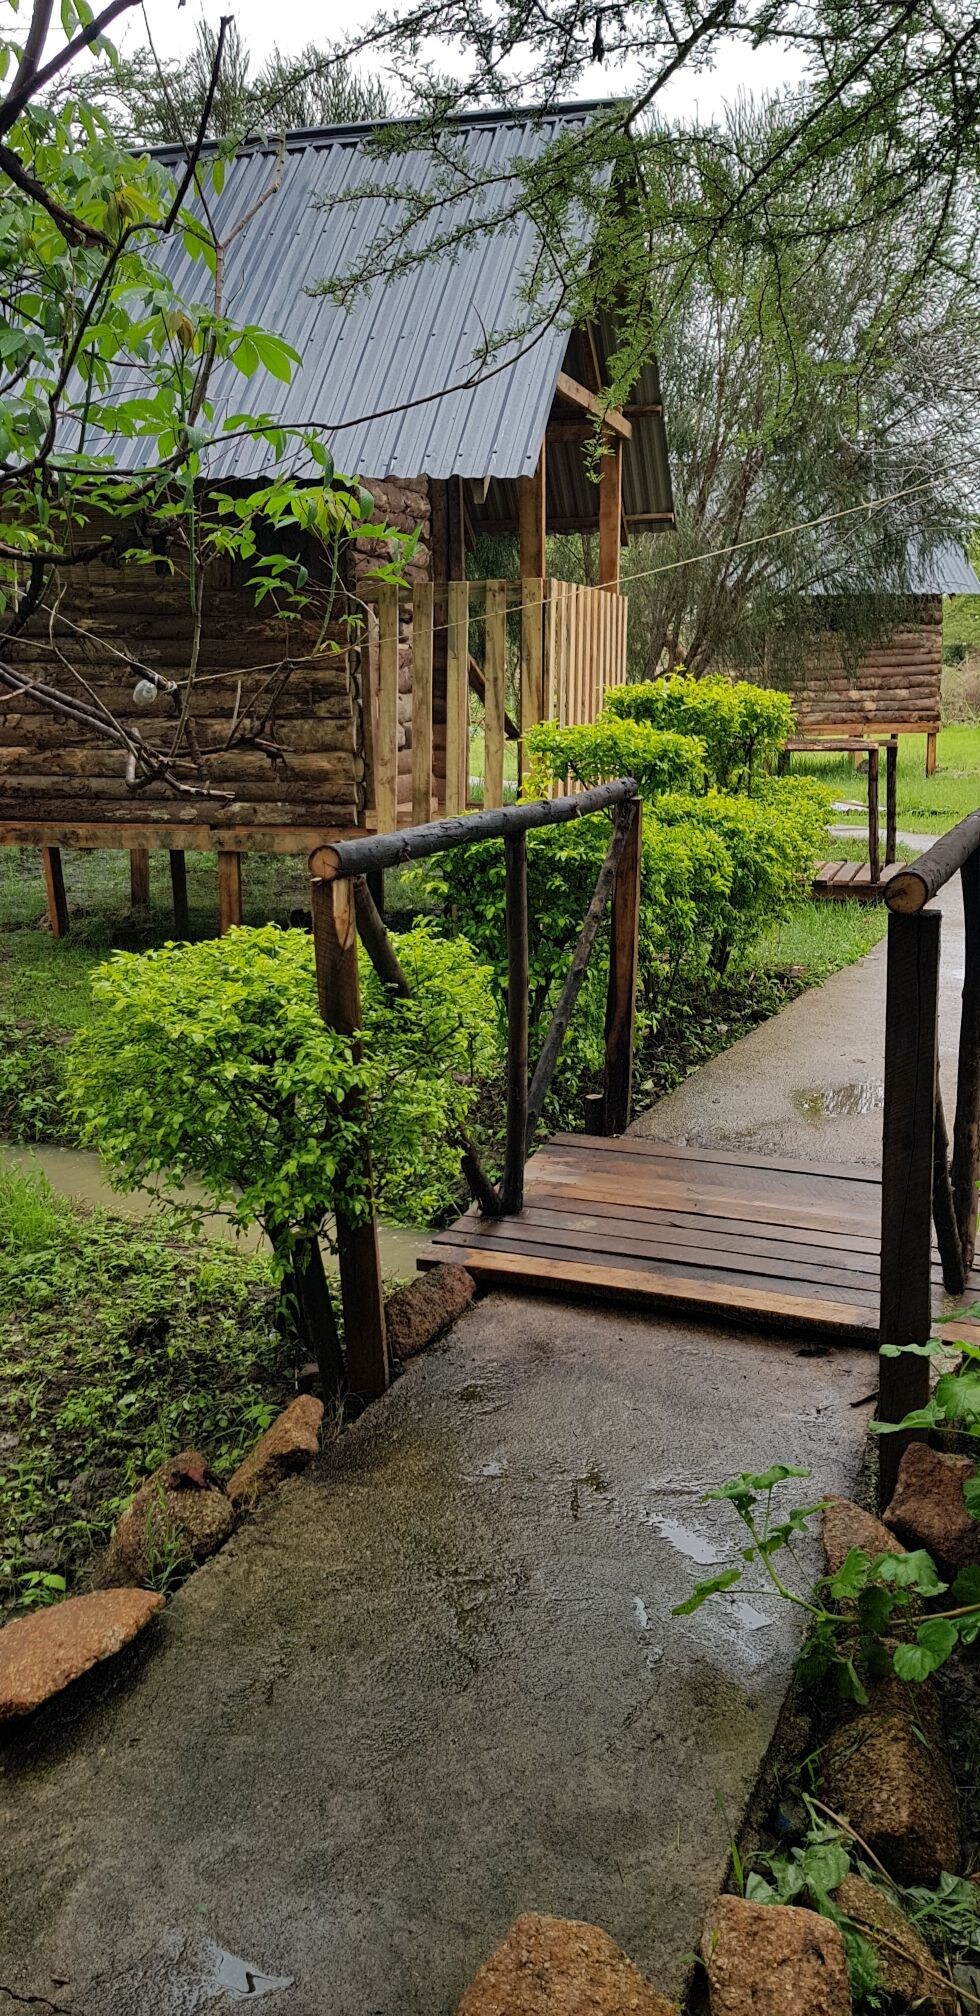 Welcome to Bwawan village resort for b&b